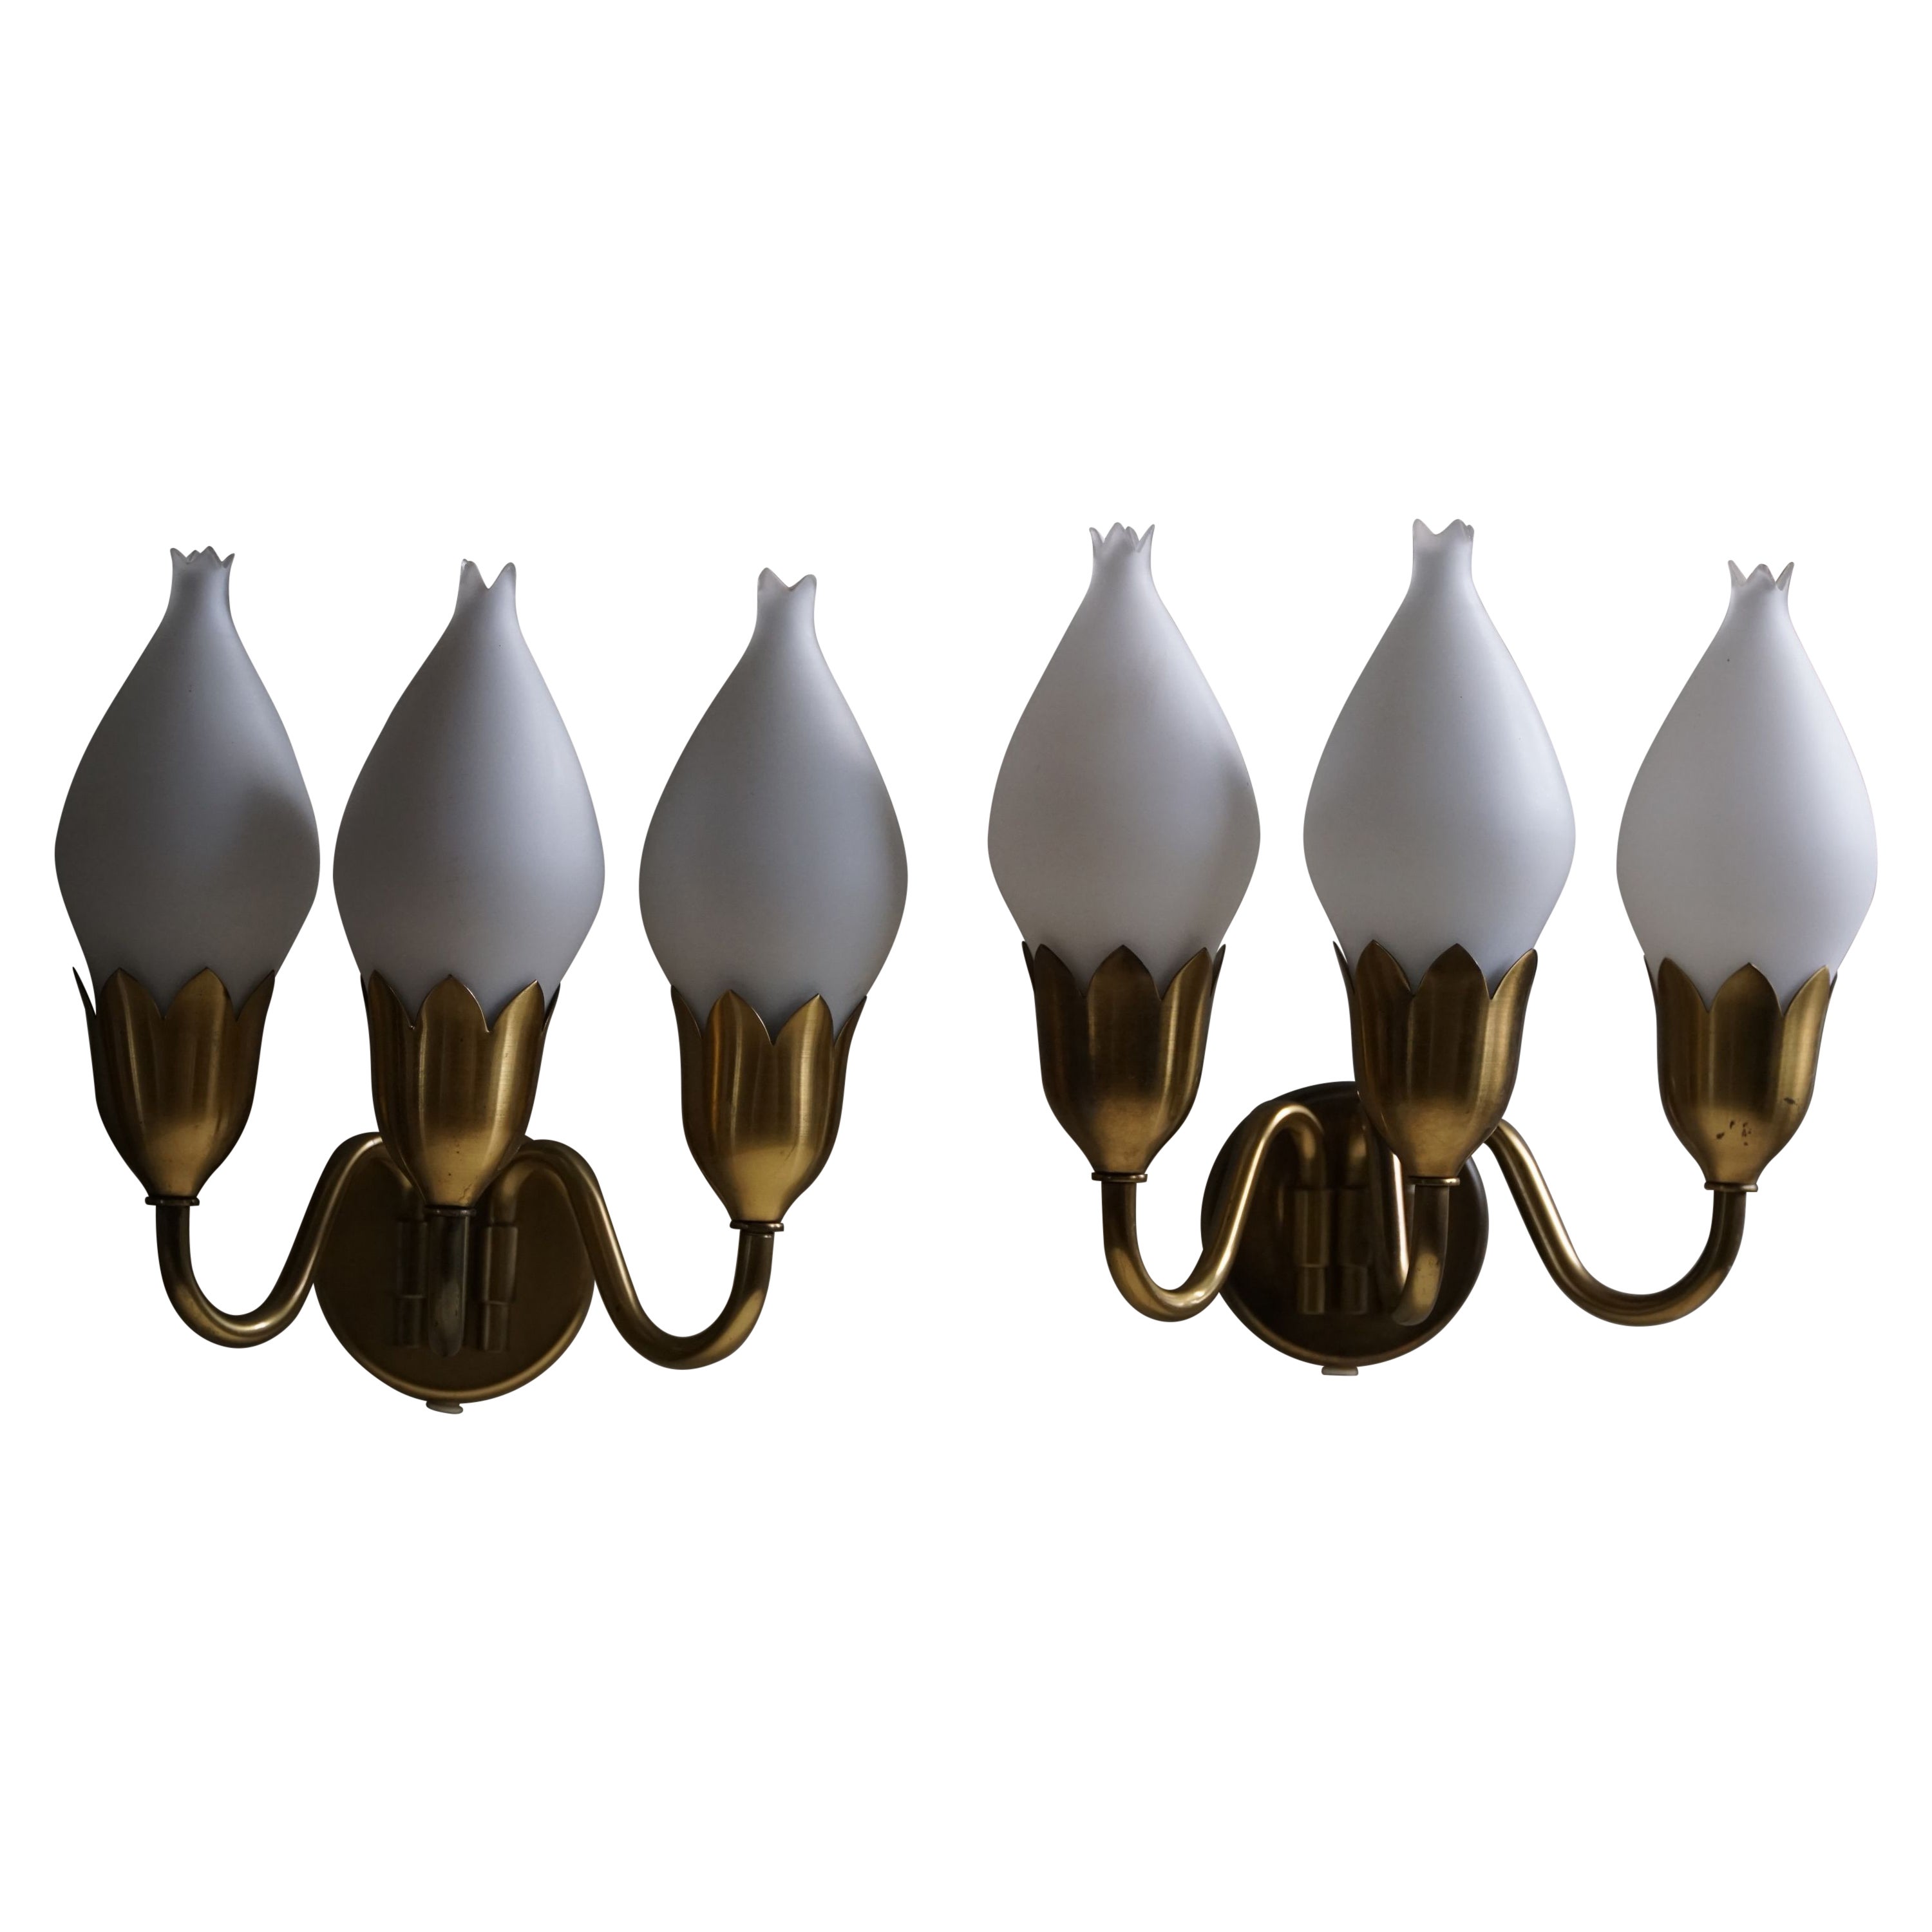 Fog & Mørup, A Pair of 3-Arm "Tulip" Wall Lamps, Danish Modern, 1950s For Sale